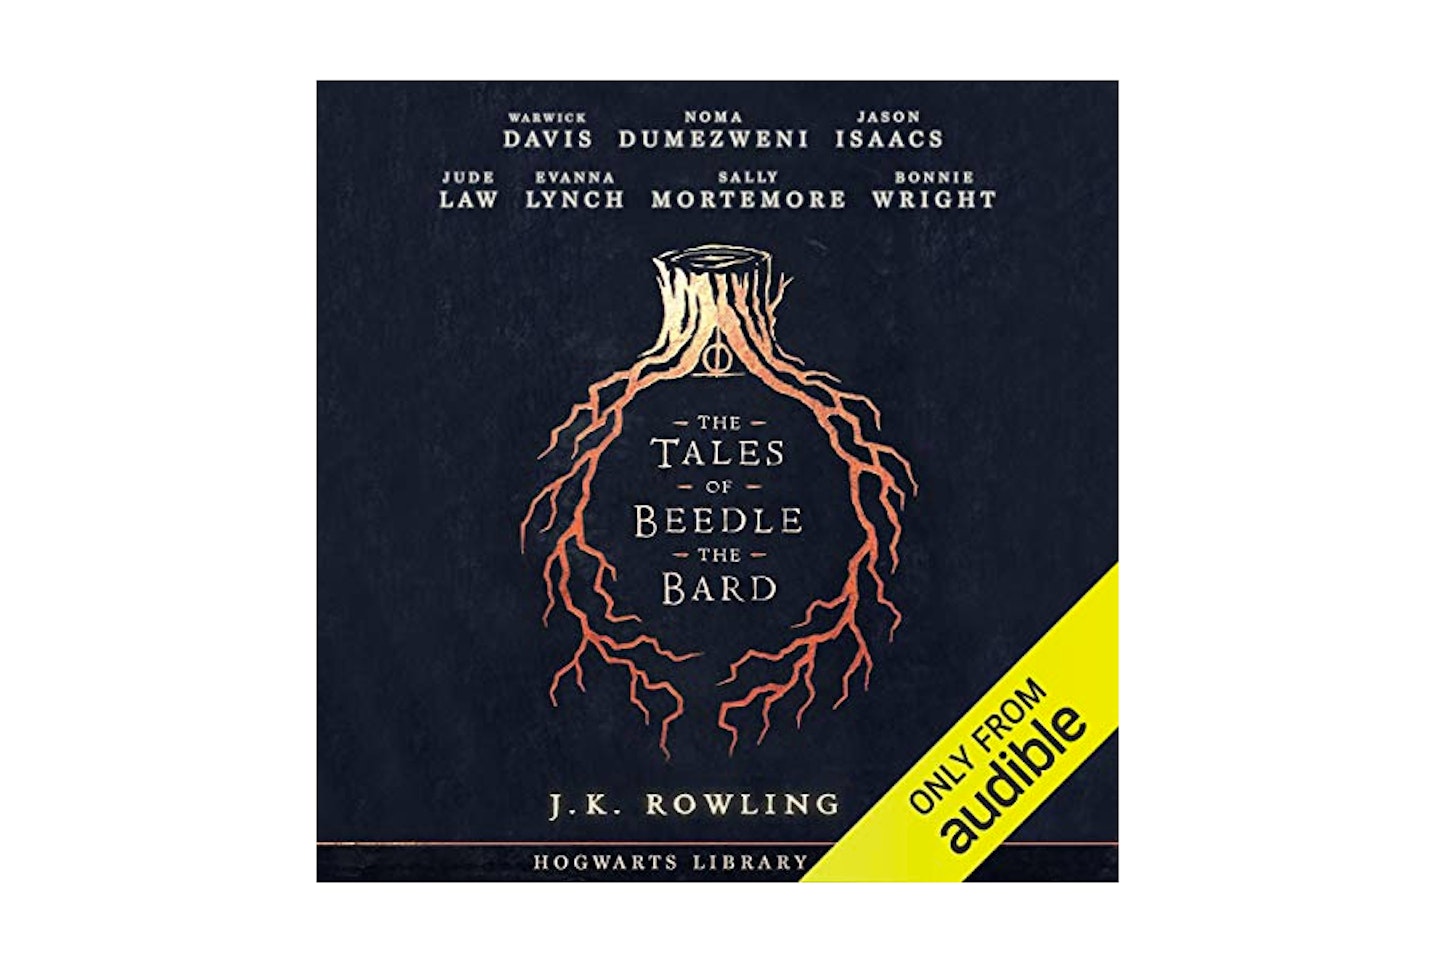 The Tales Of Beedle The Bard by J.K. Rowling